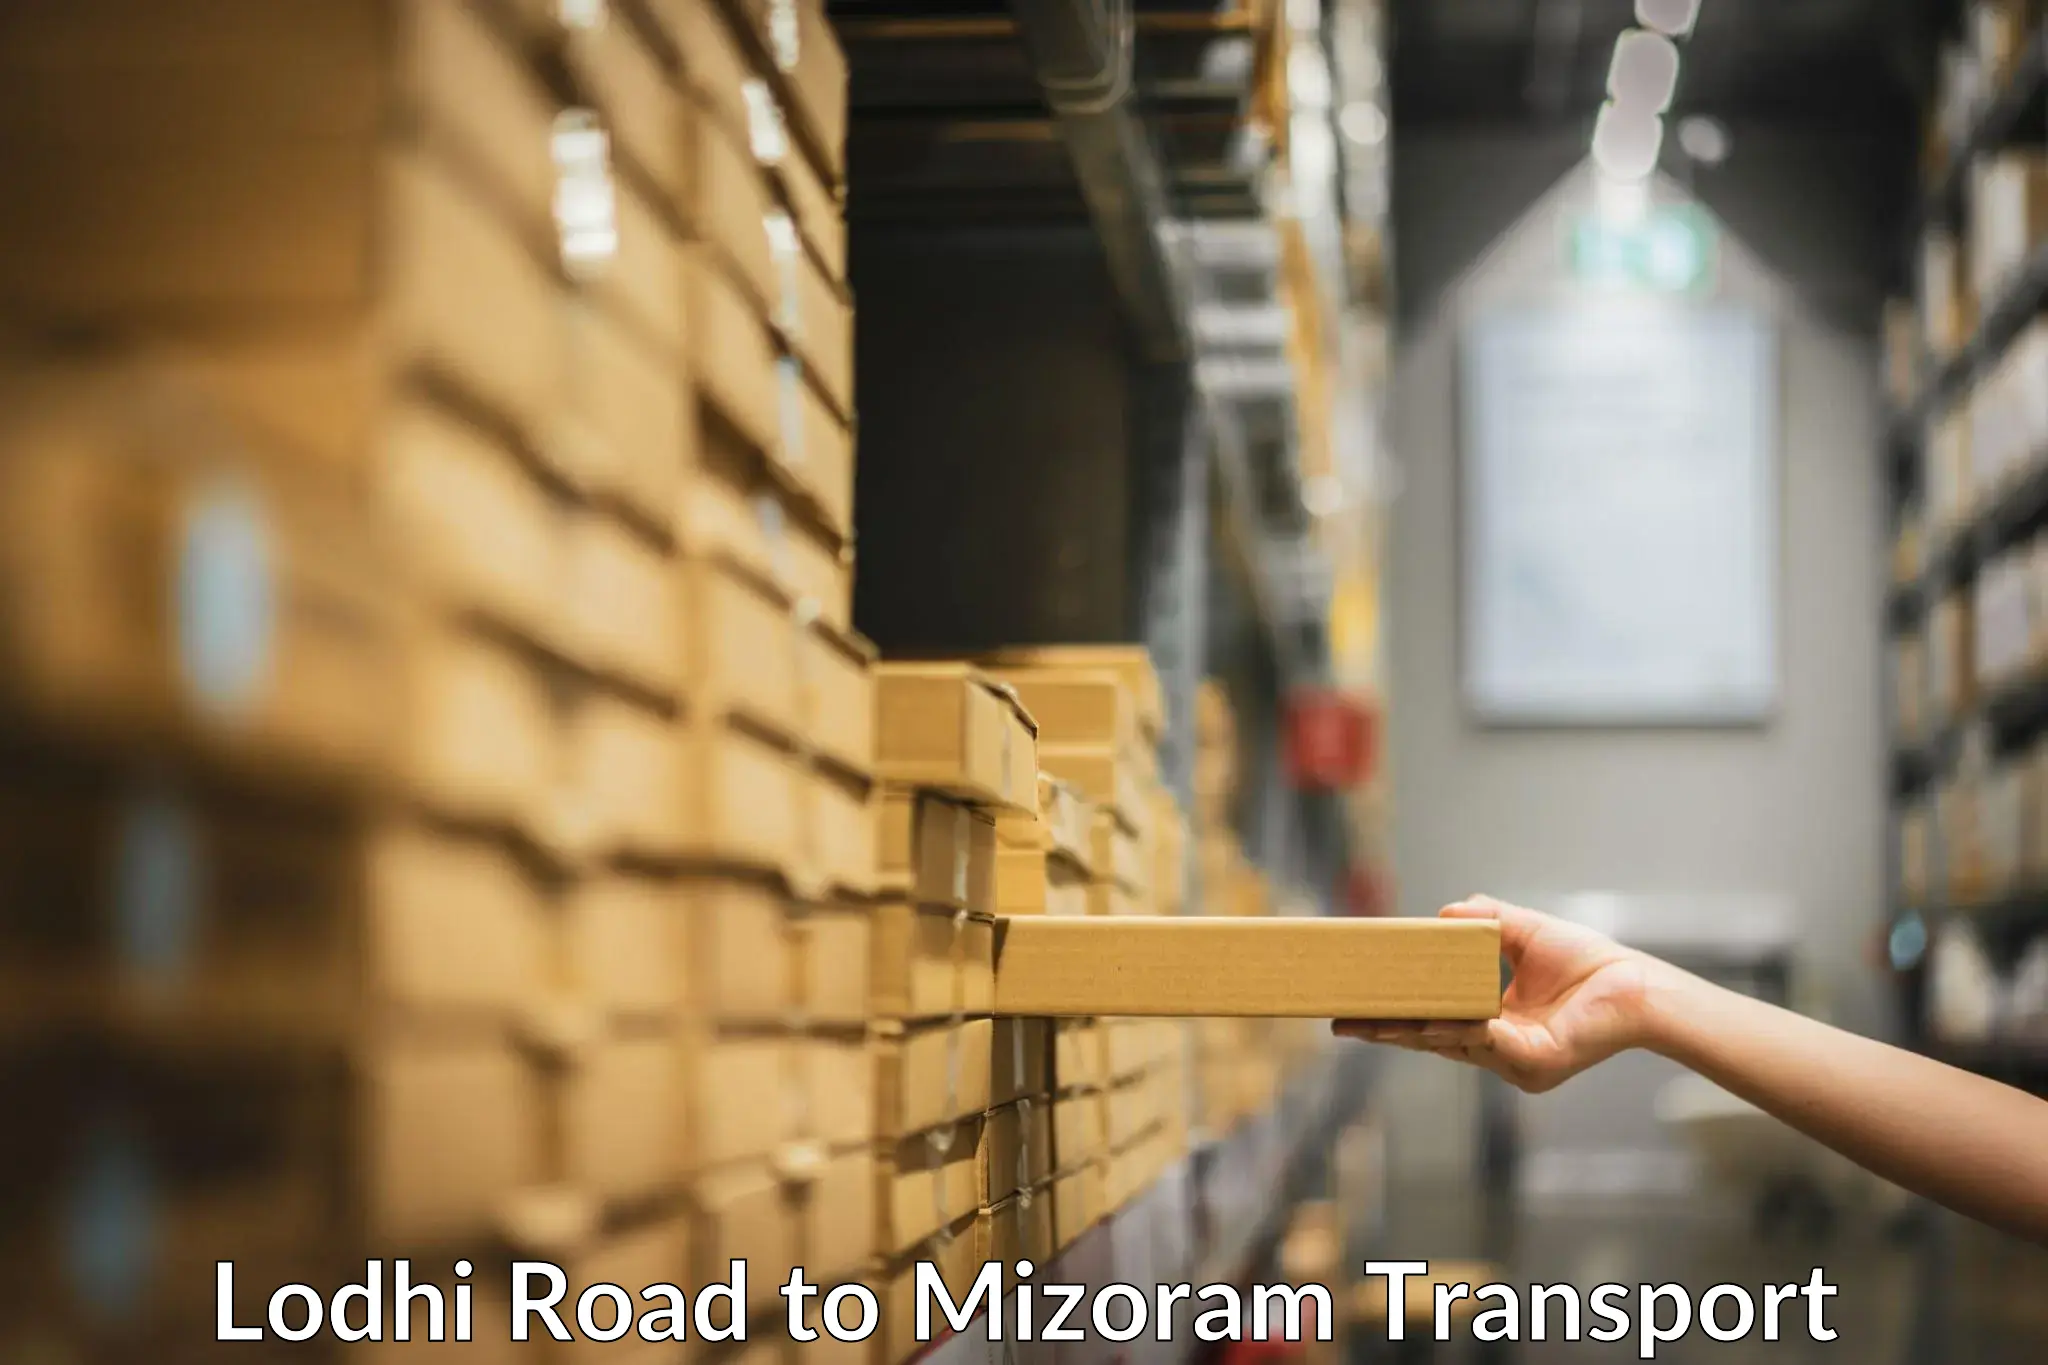 Daily transport service Lodhi Road to Mizoram